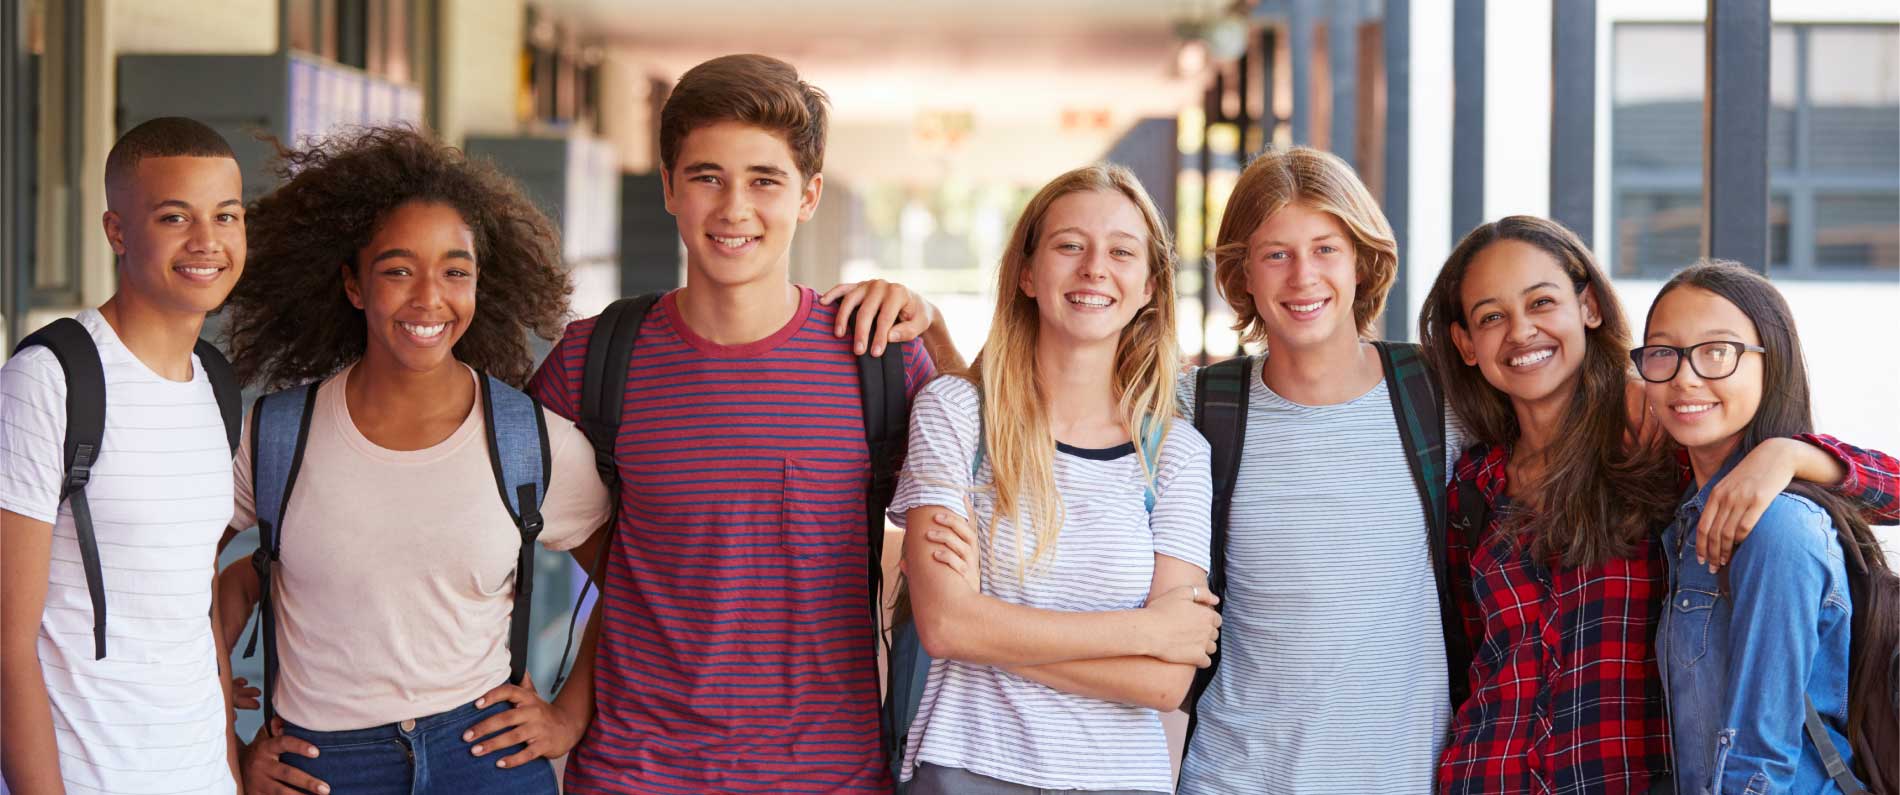 Youth-Bullying-Protection1900x795